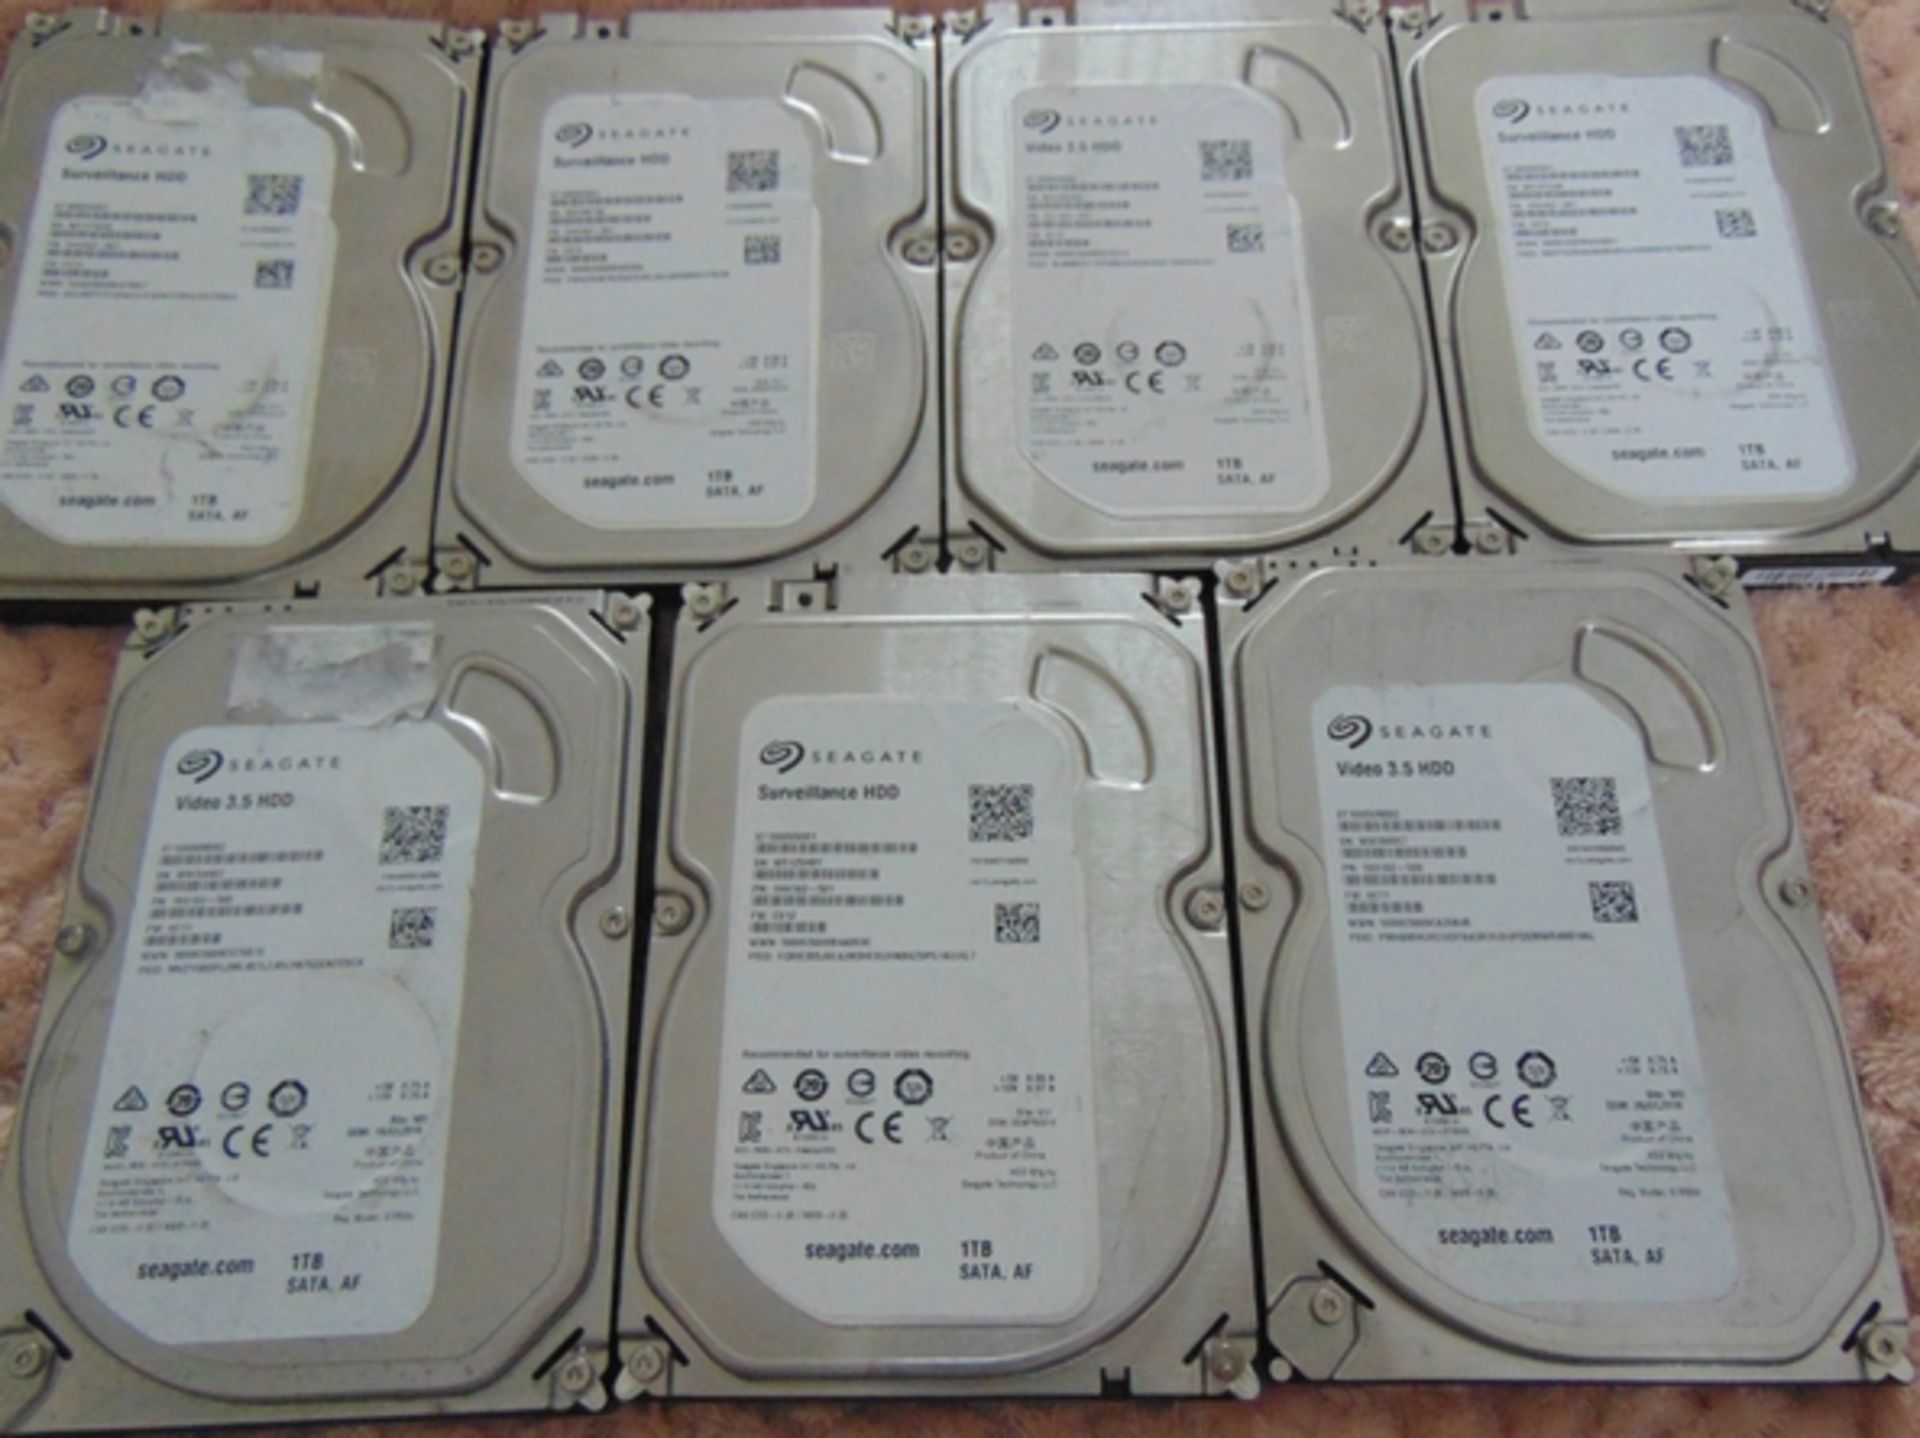 Area K4. Here We Have 7 x 1Tb Hard Drives